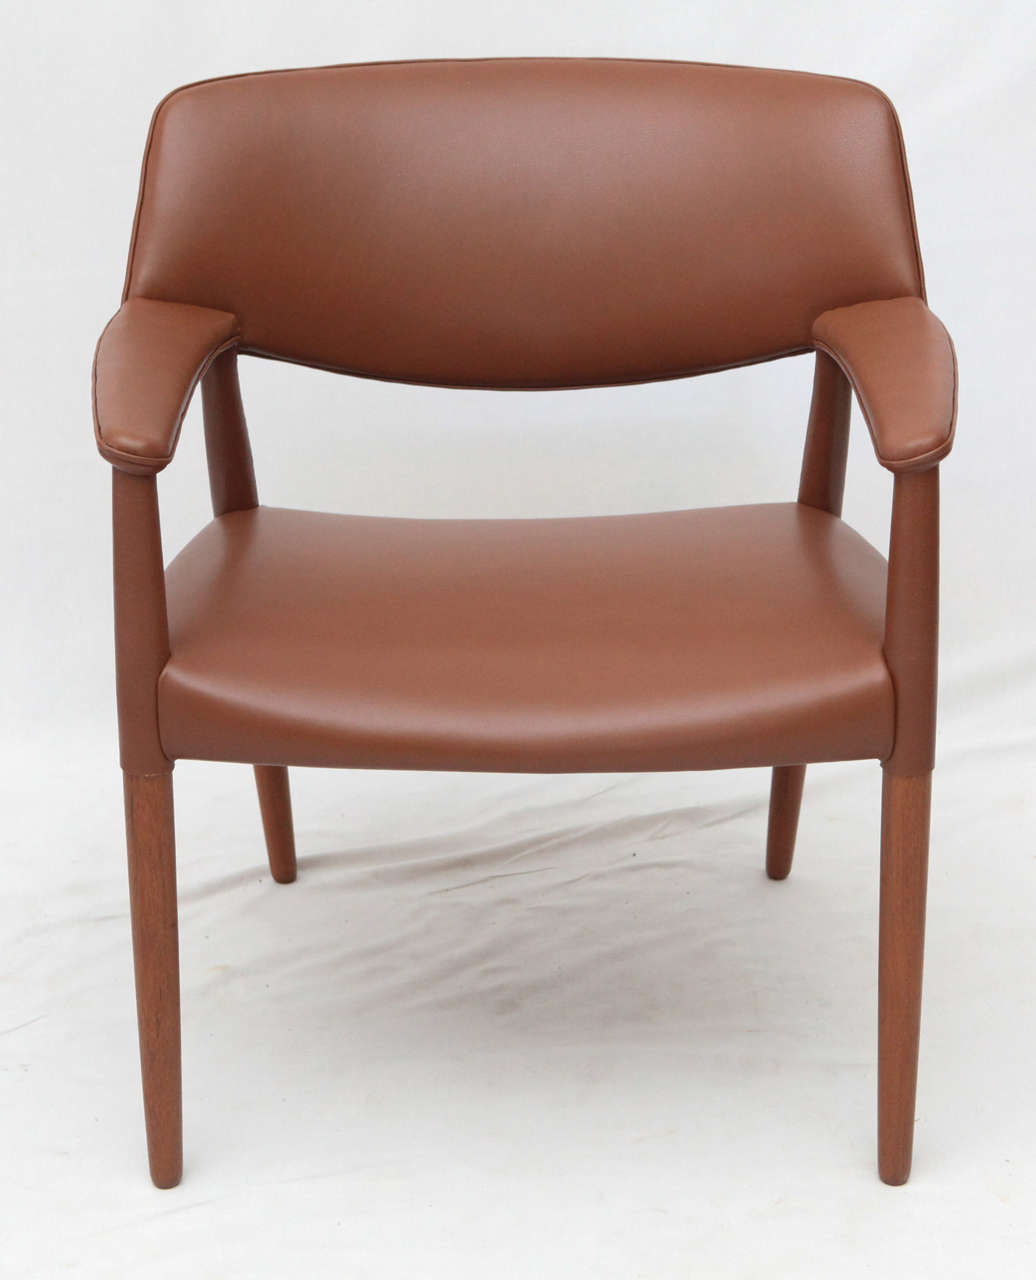 Aksel Bender Madsen & Ejner Larsen armchair designed in 1949 and produced by Willy Beck. Rosewood legs with new black leather.